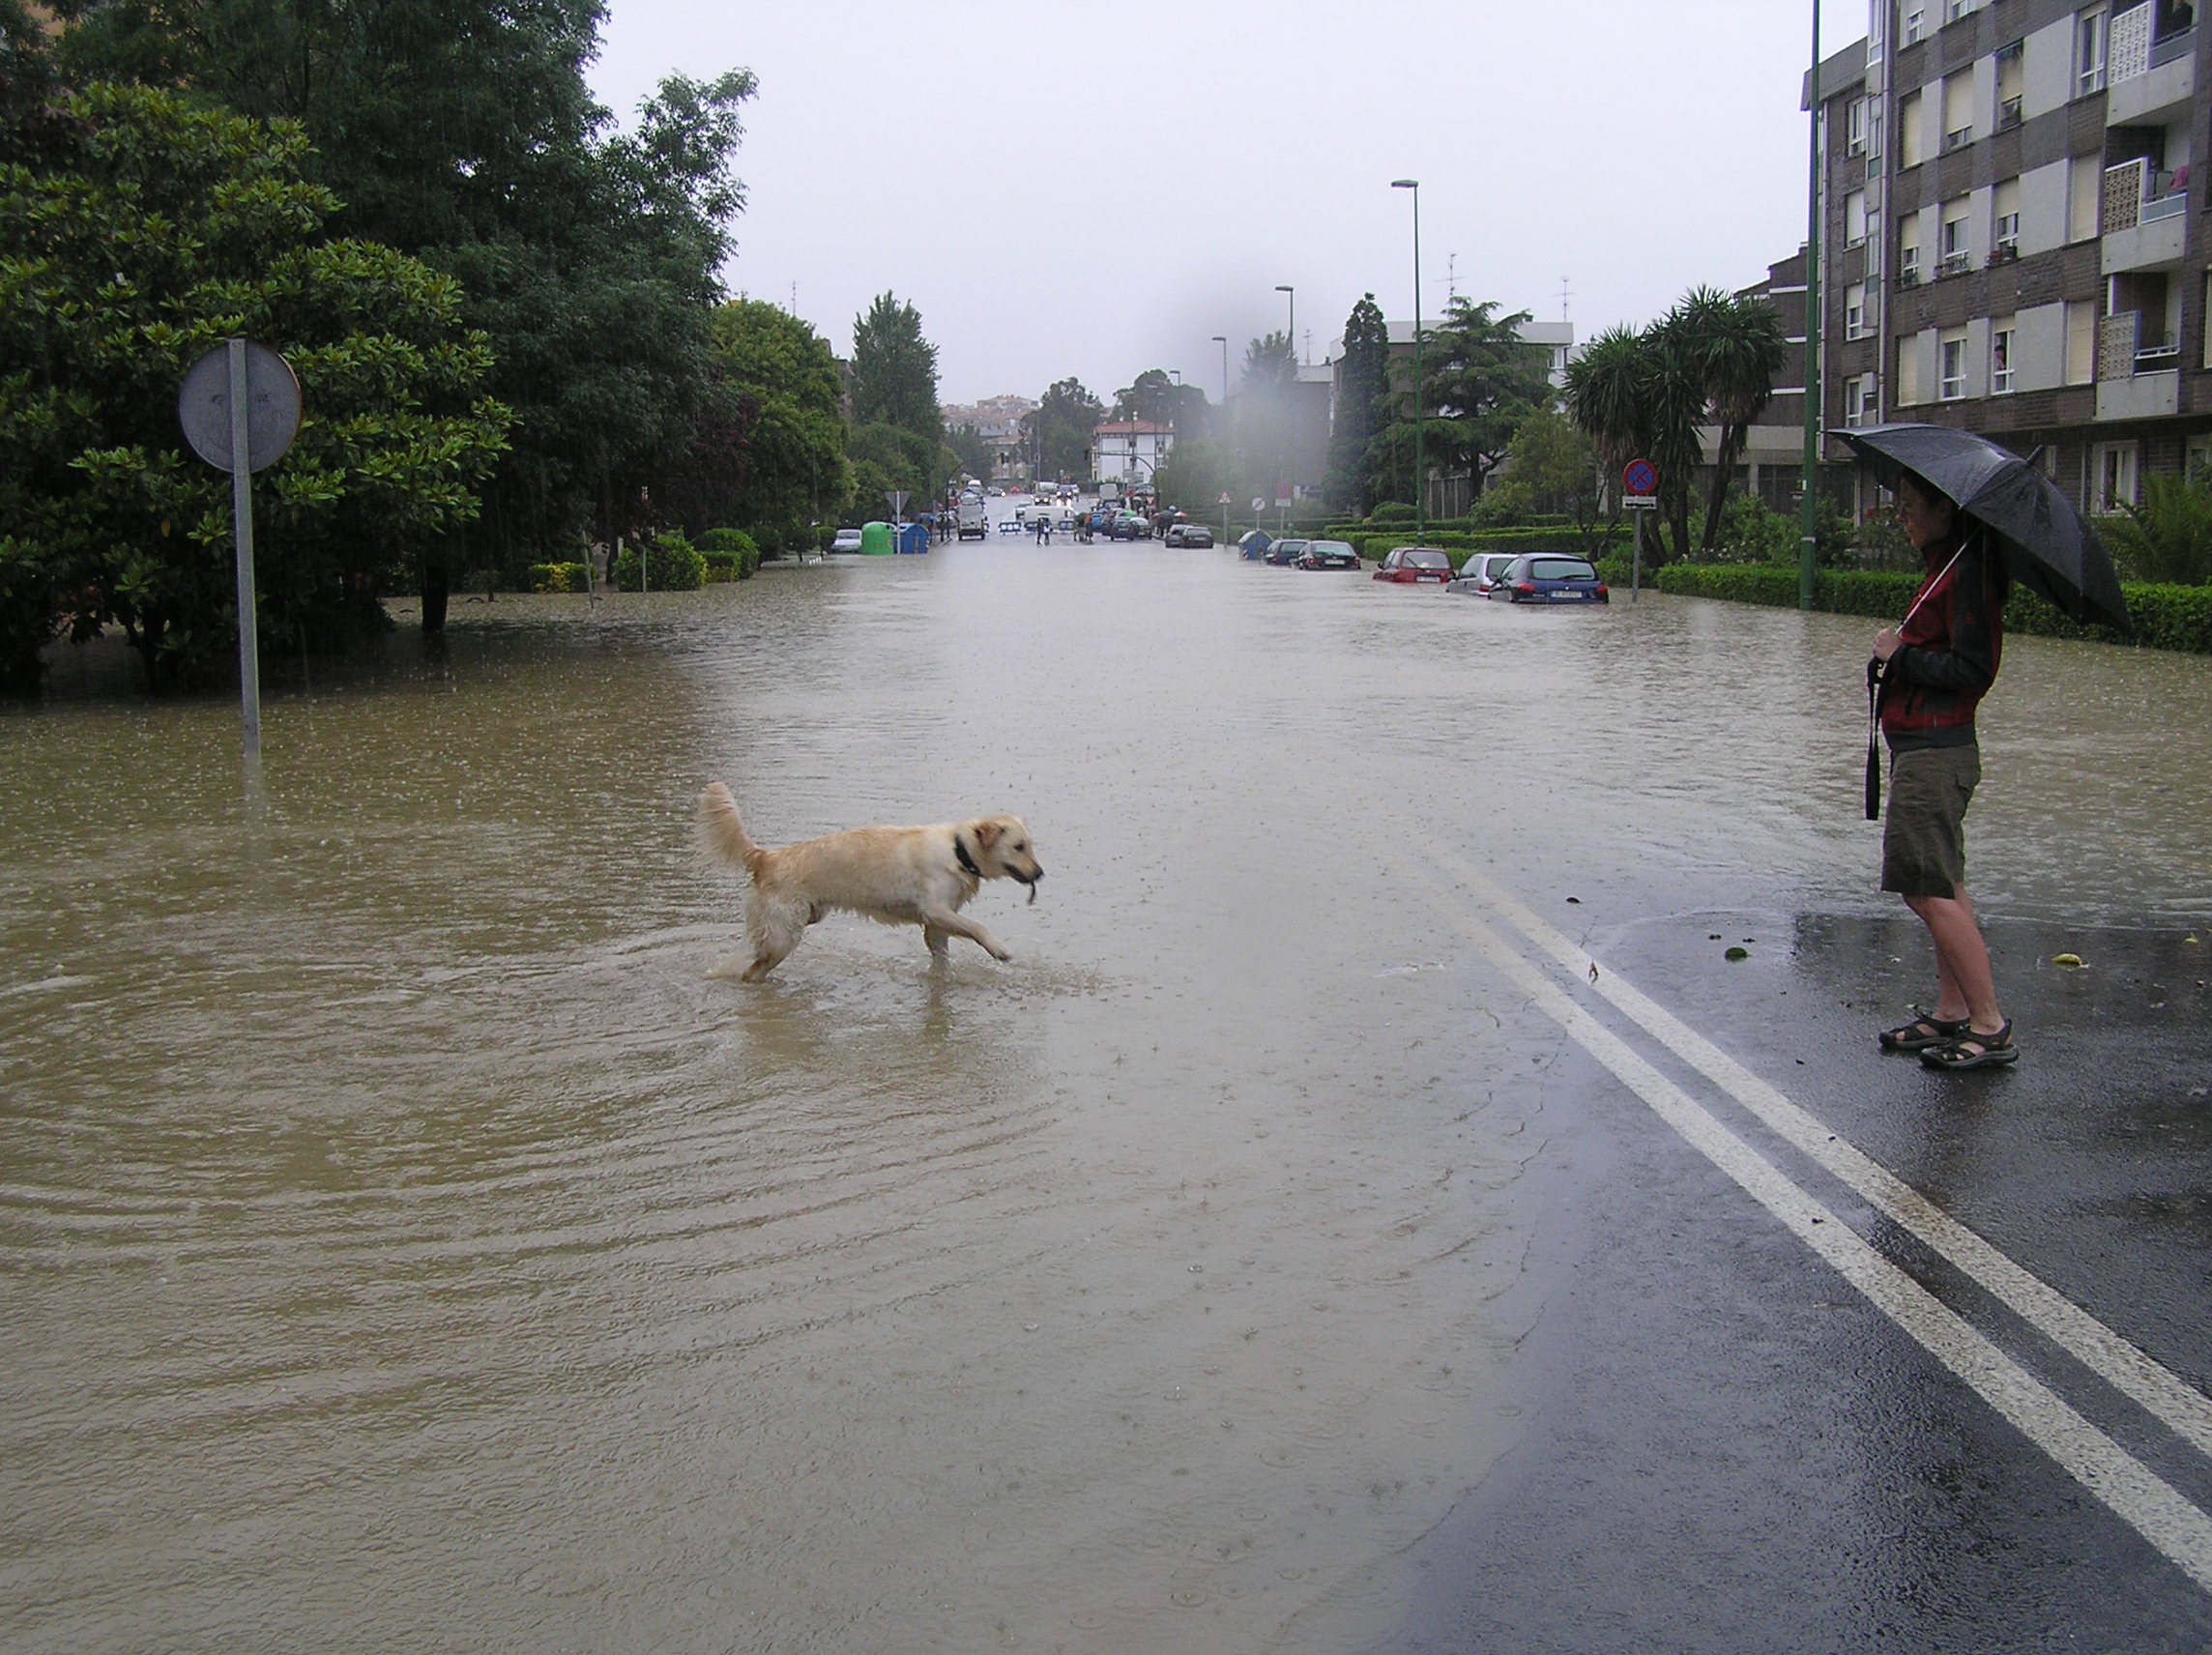 Dog next to flood waters